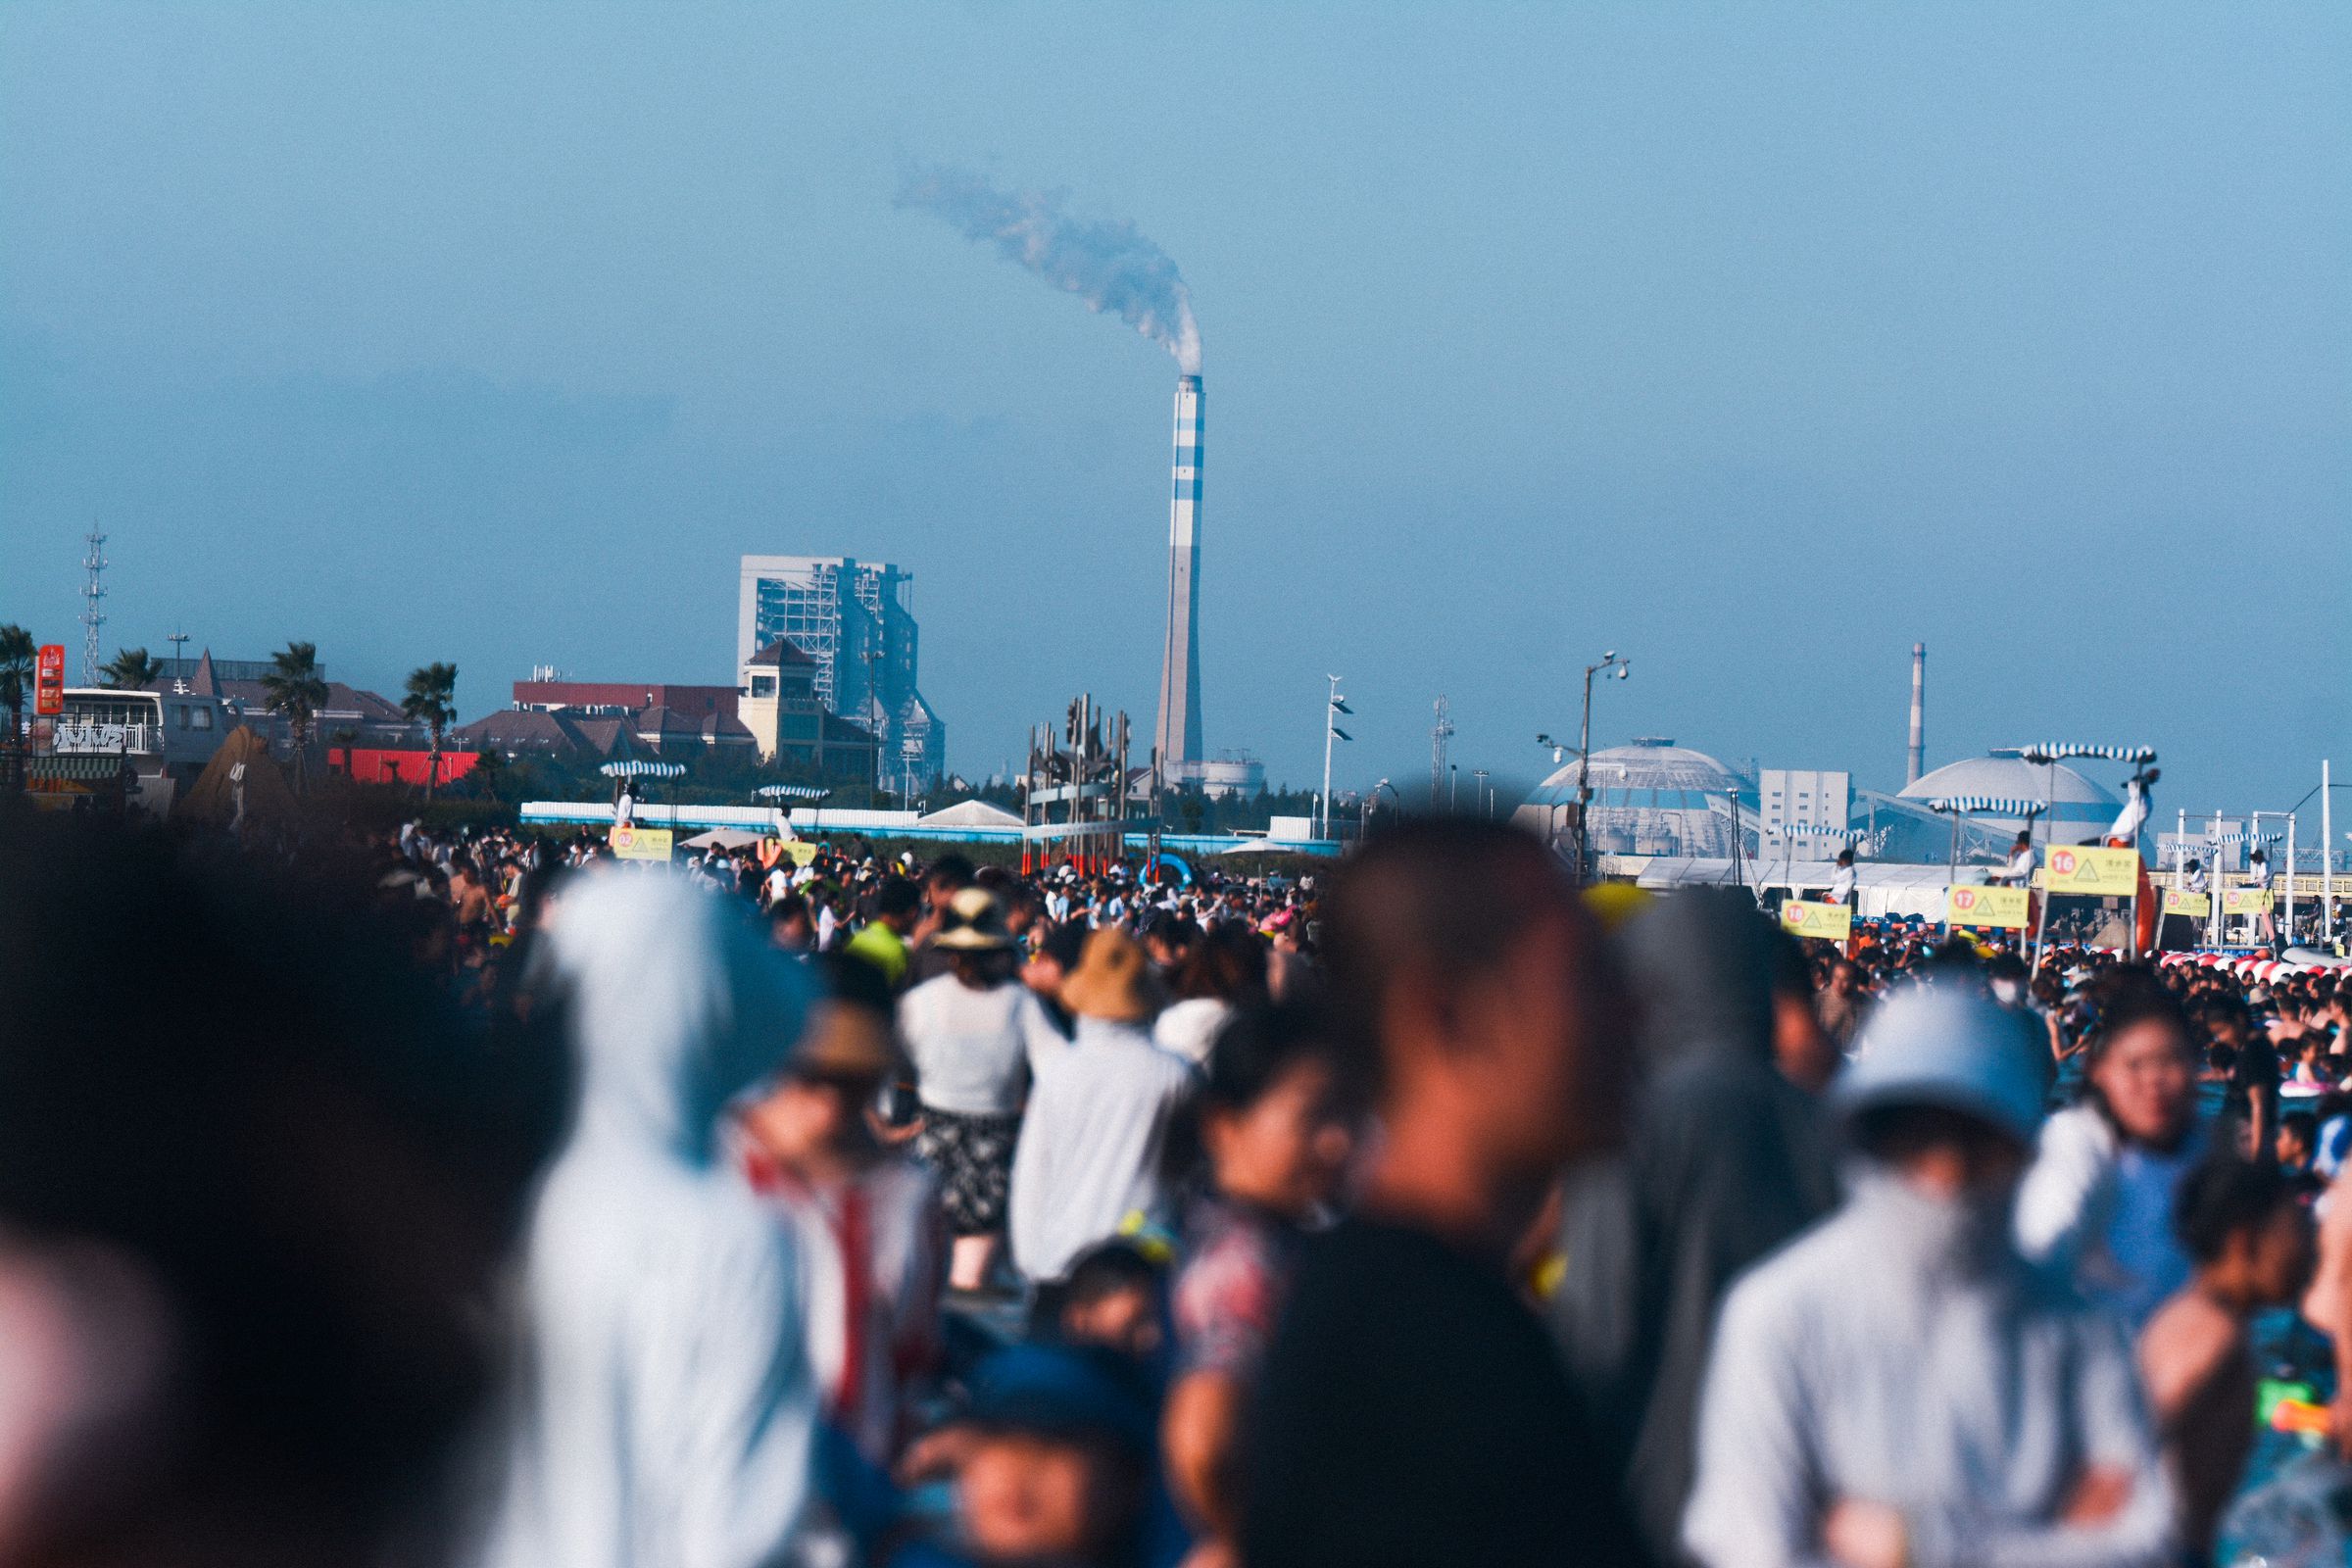 A smokestack bellows pollution behind a crowd of people at the beach.